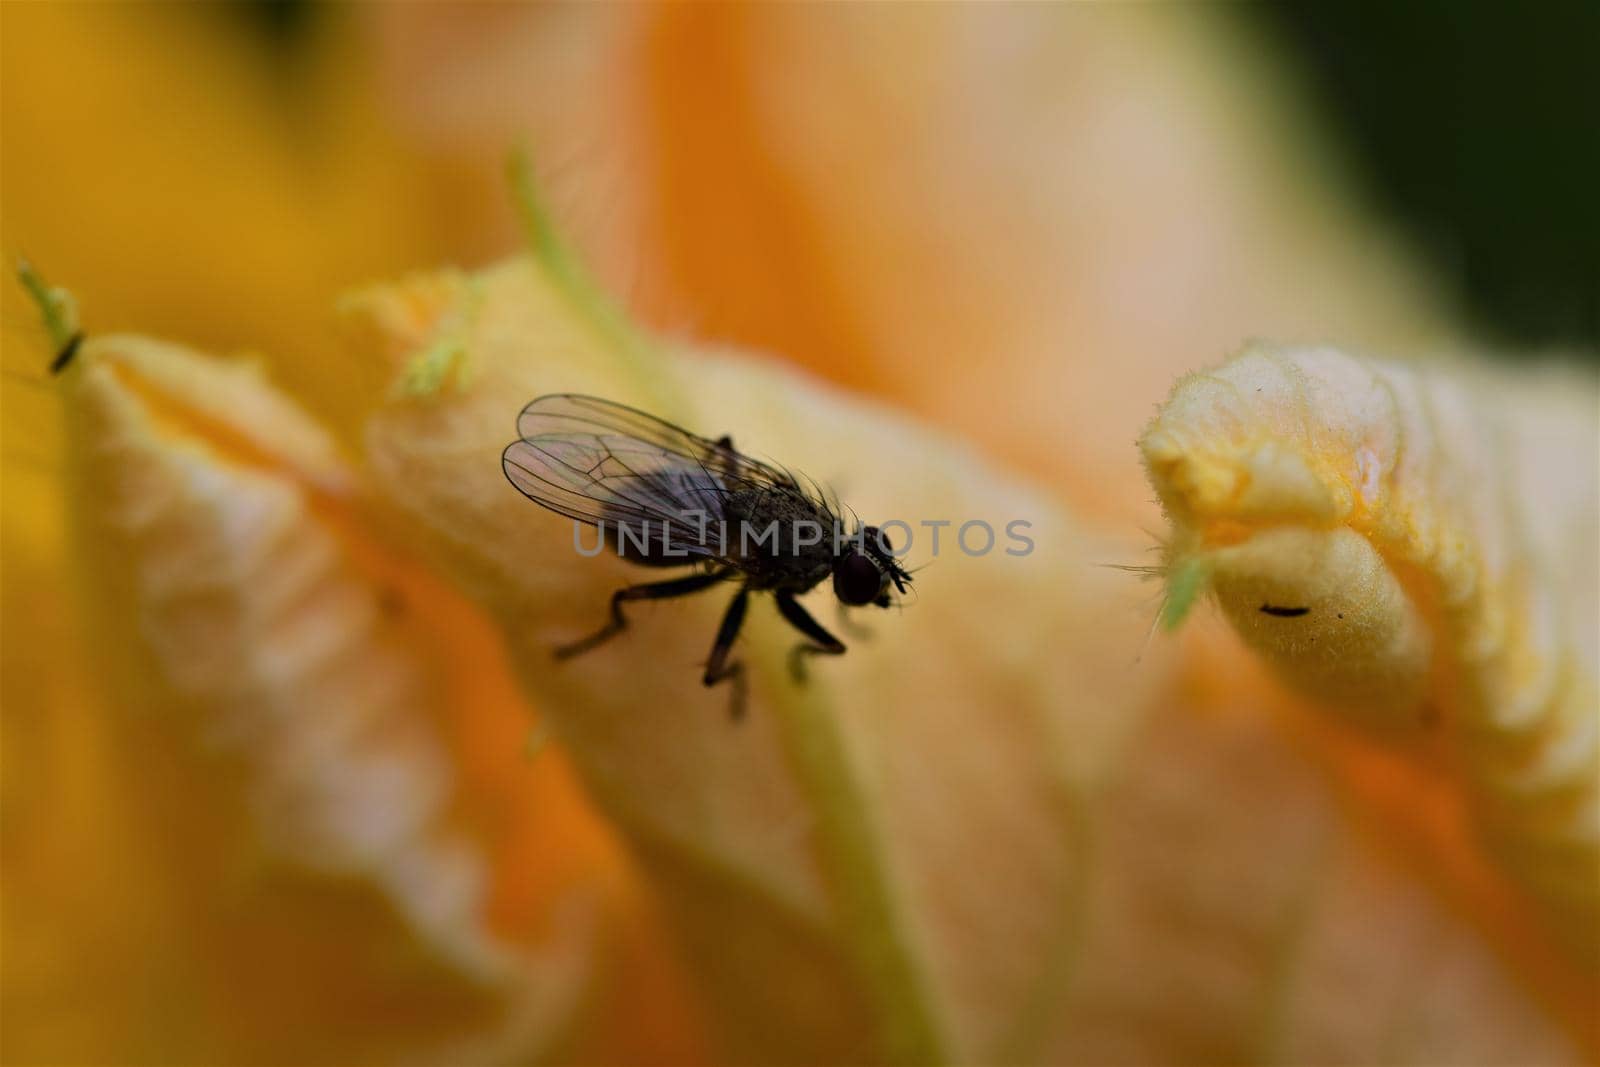 One fly sits on a yellow pumkin blossom by Luise123